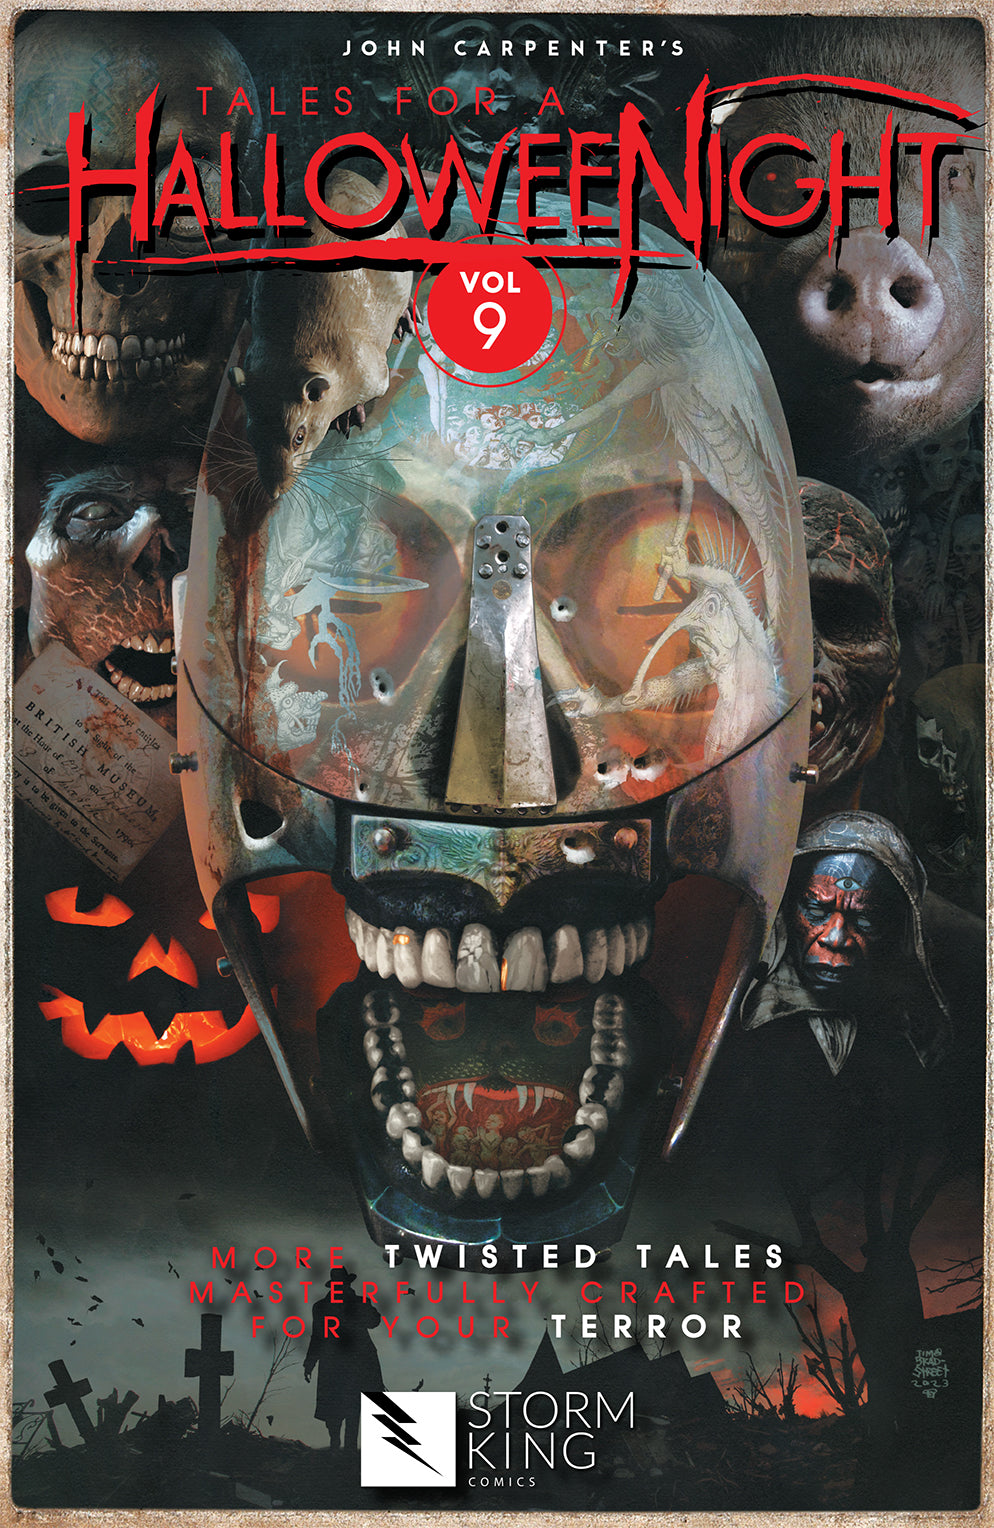 Tales for a HalloweeNight Vol. 9 (Signed)